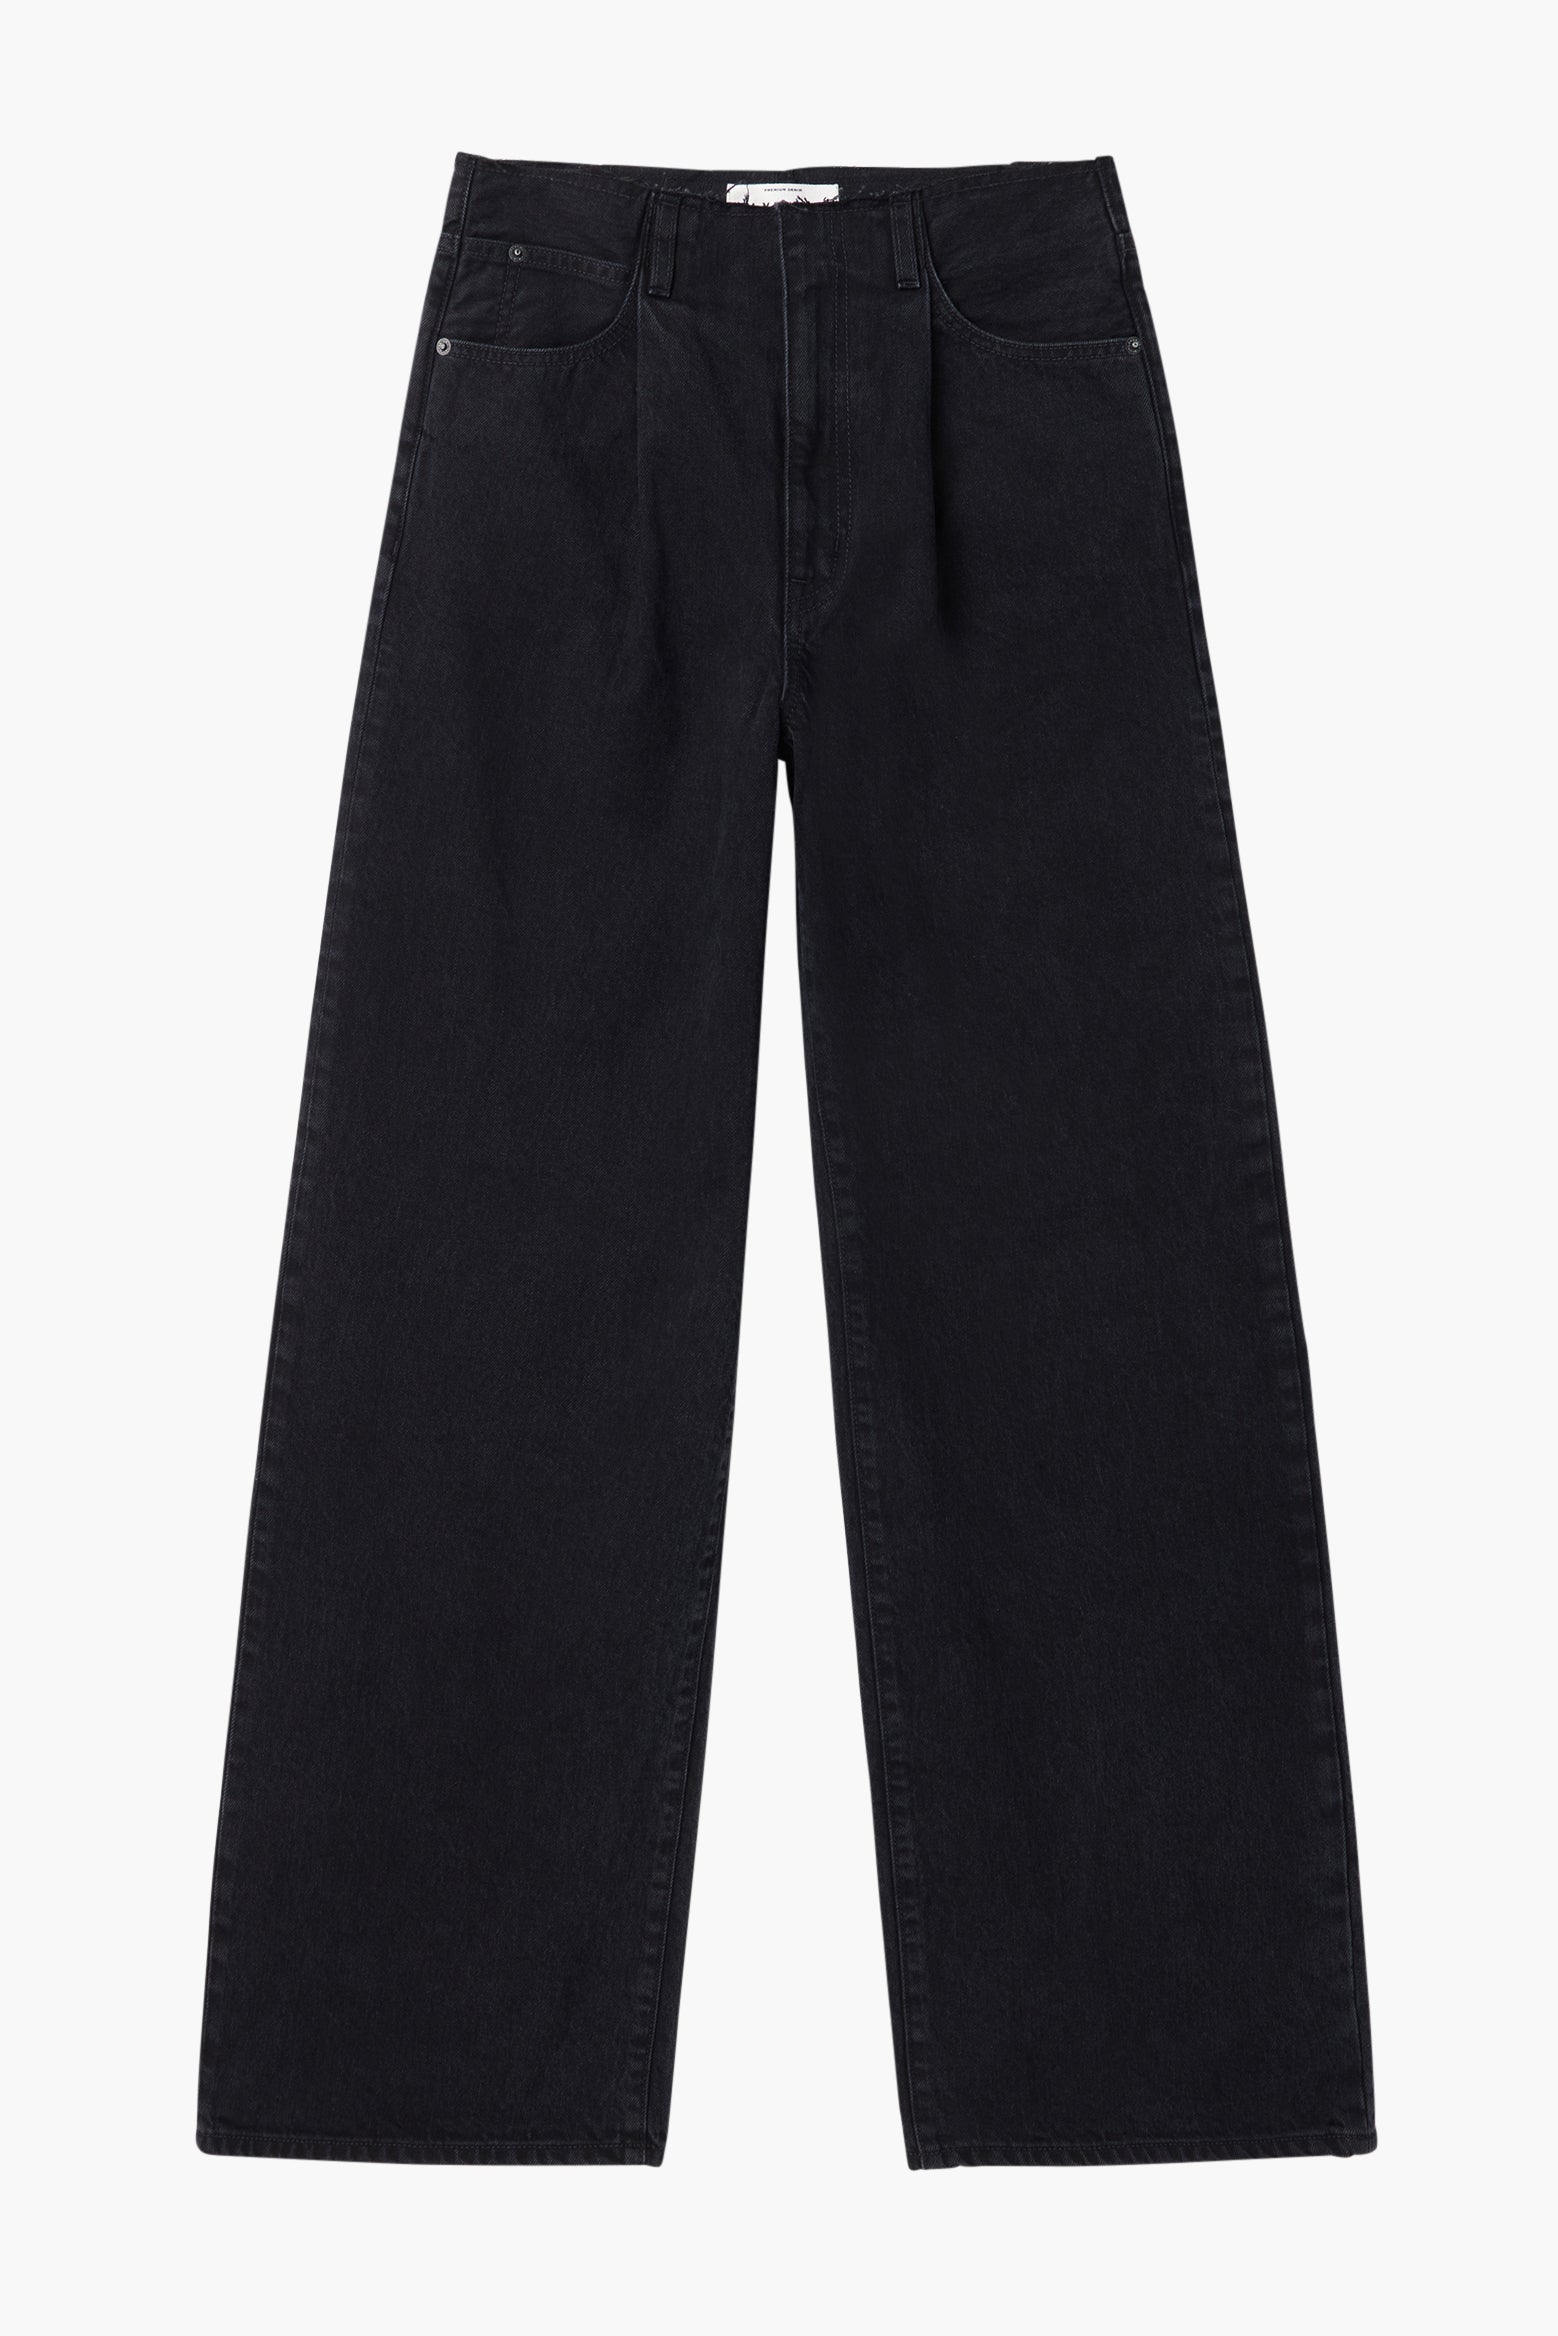 Slvrlake Taylor Wide Pleat Jean in Shadow Ridge available at TNT The New Trend Australia.